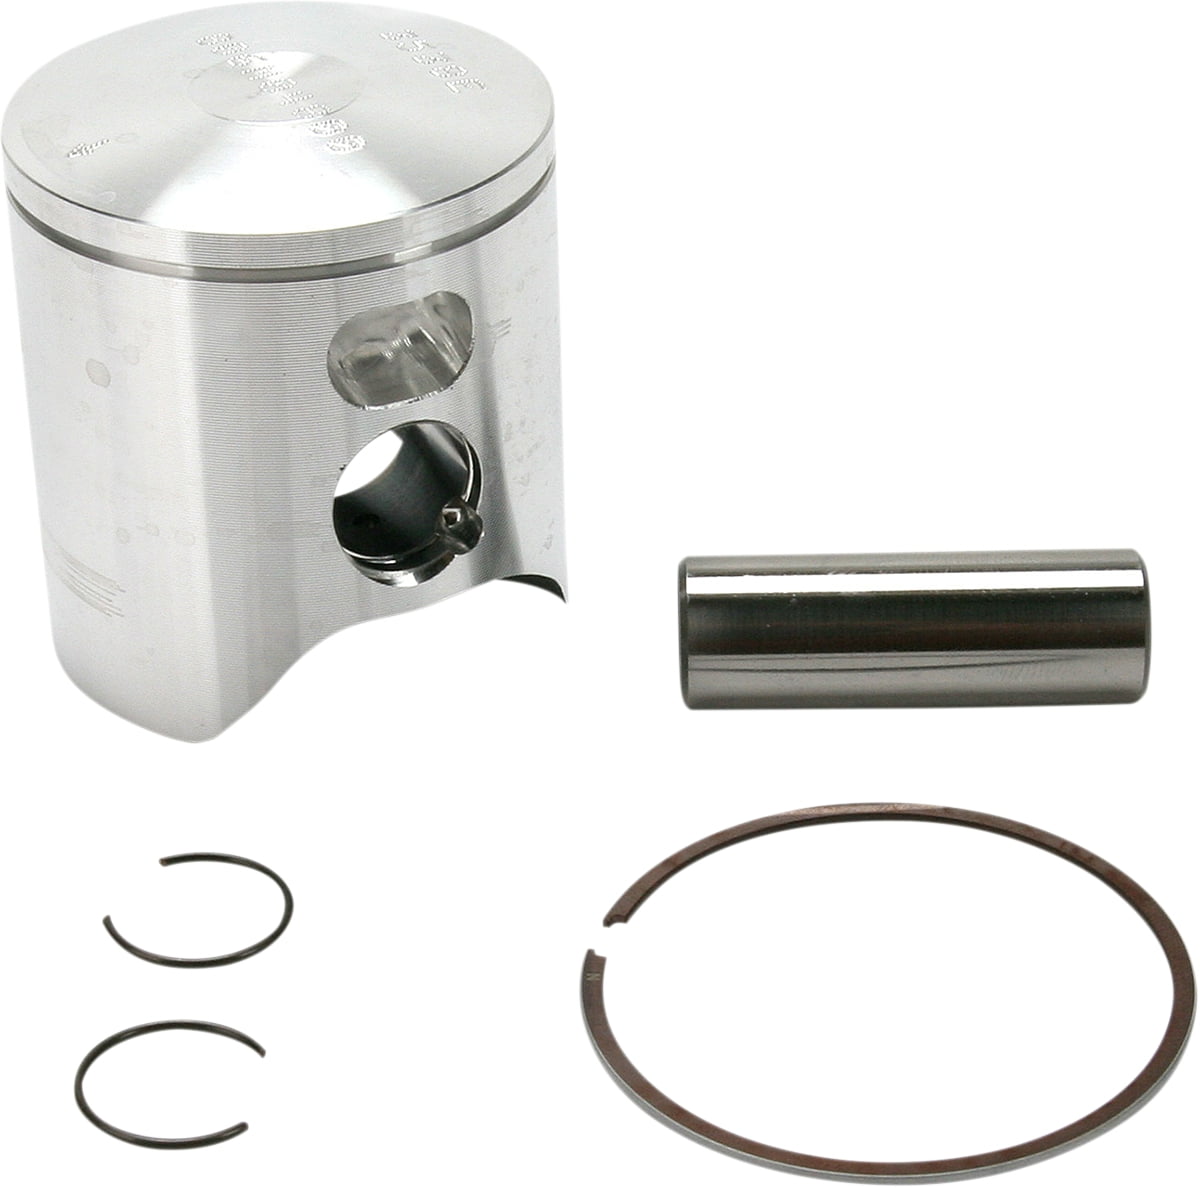 Wiseco Forged Piston Kit 11:1 Comp 81mm Big Bore 4958M08100 